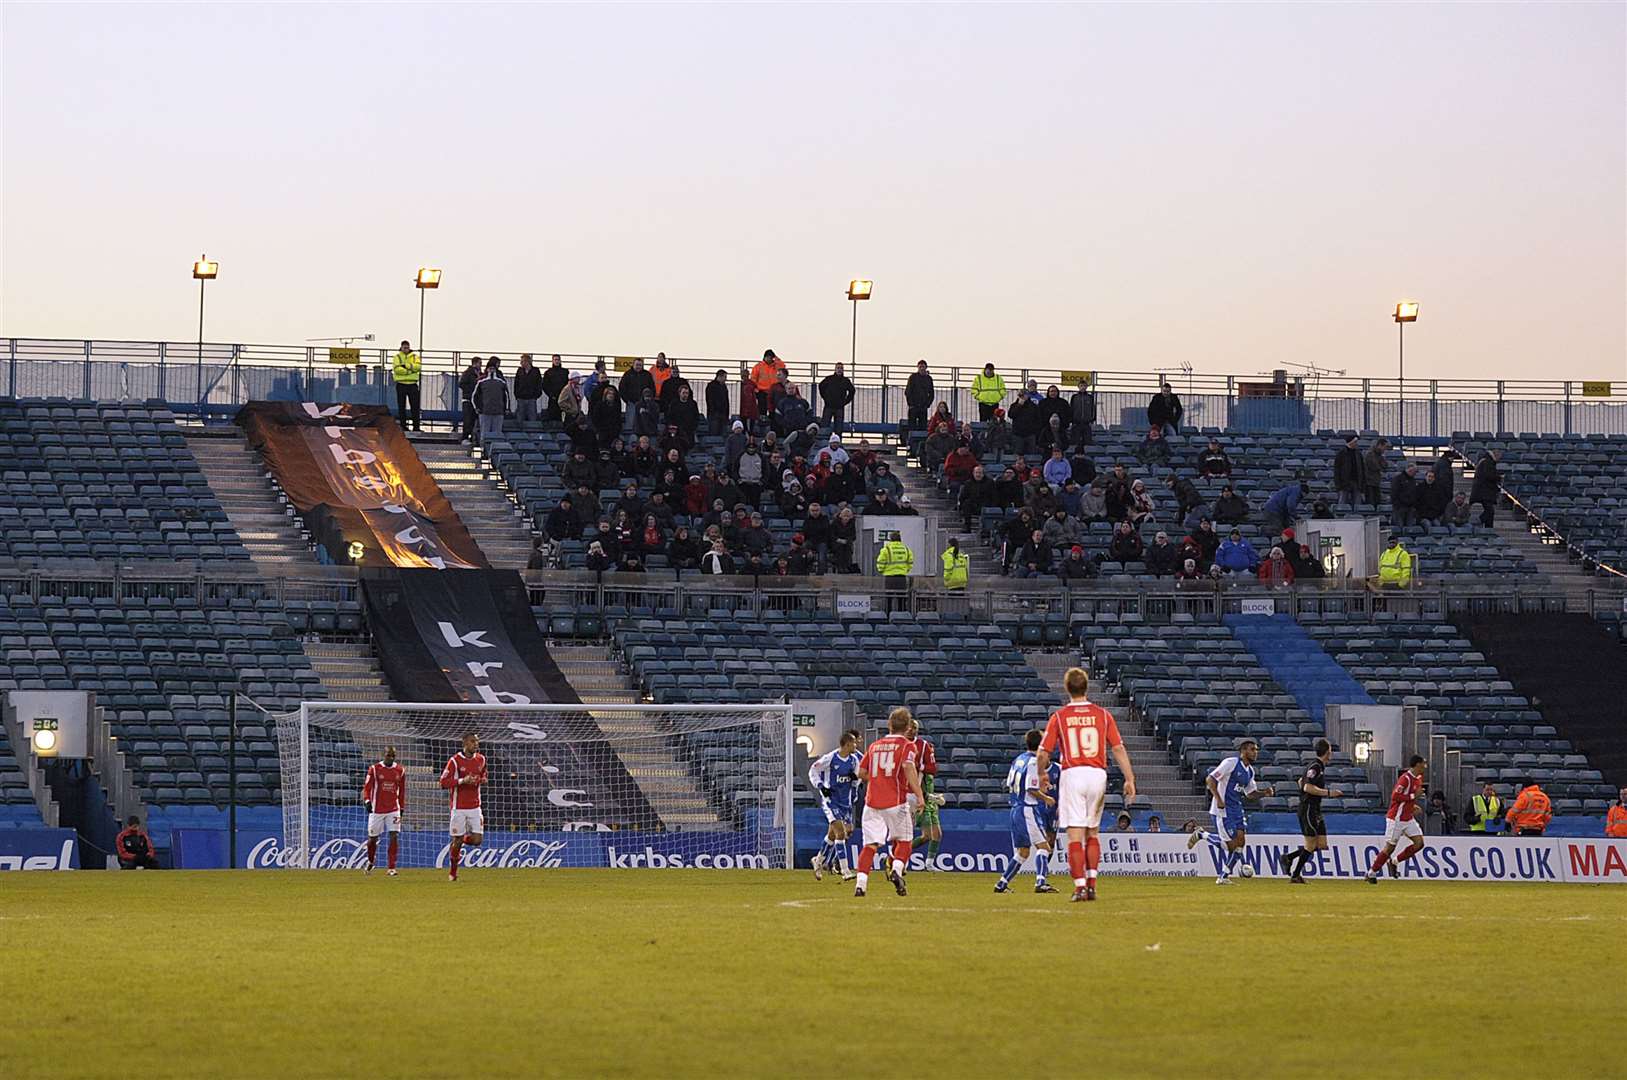 Away fans brave the almost freezing conditions in a game at Gillingham Picture: Barry Goodwin